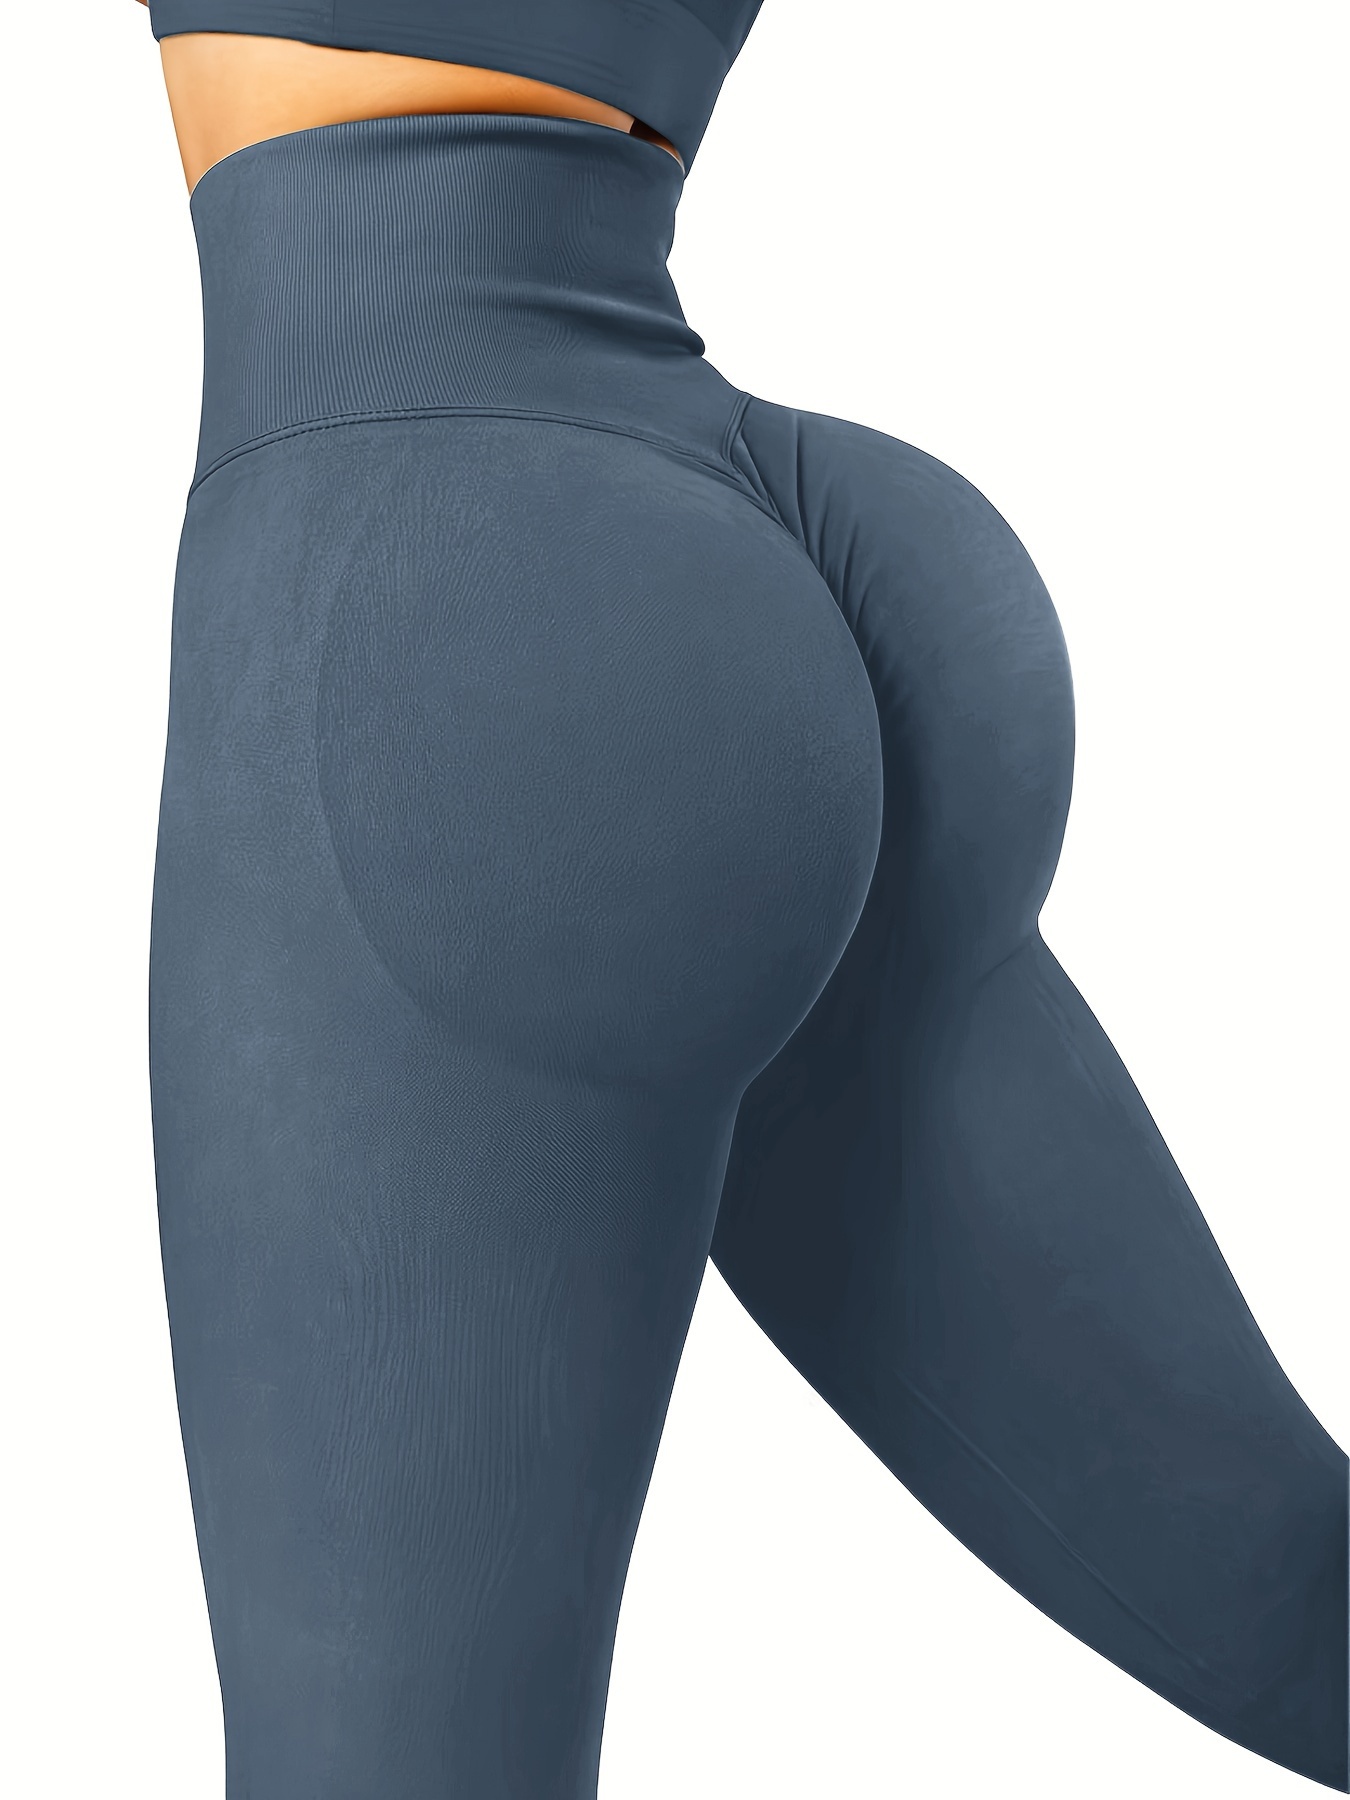 Women's High Waisted Yoga Pants Tummy Control Booty Leggings Workout  Running Butt Lift Textured Tights, Navy Blue, Small 